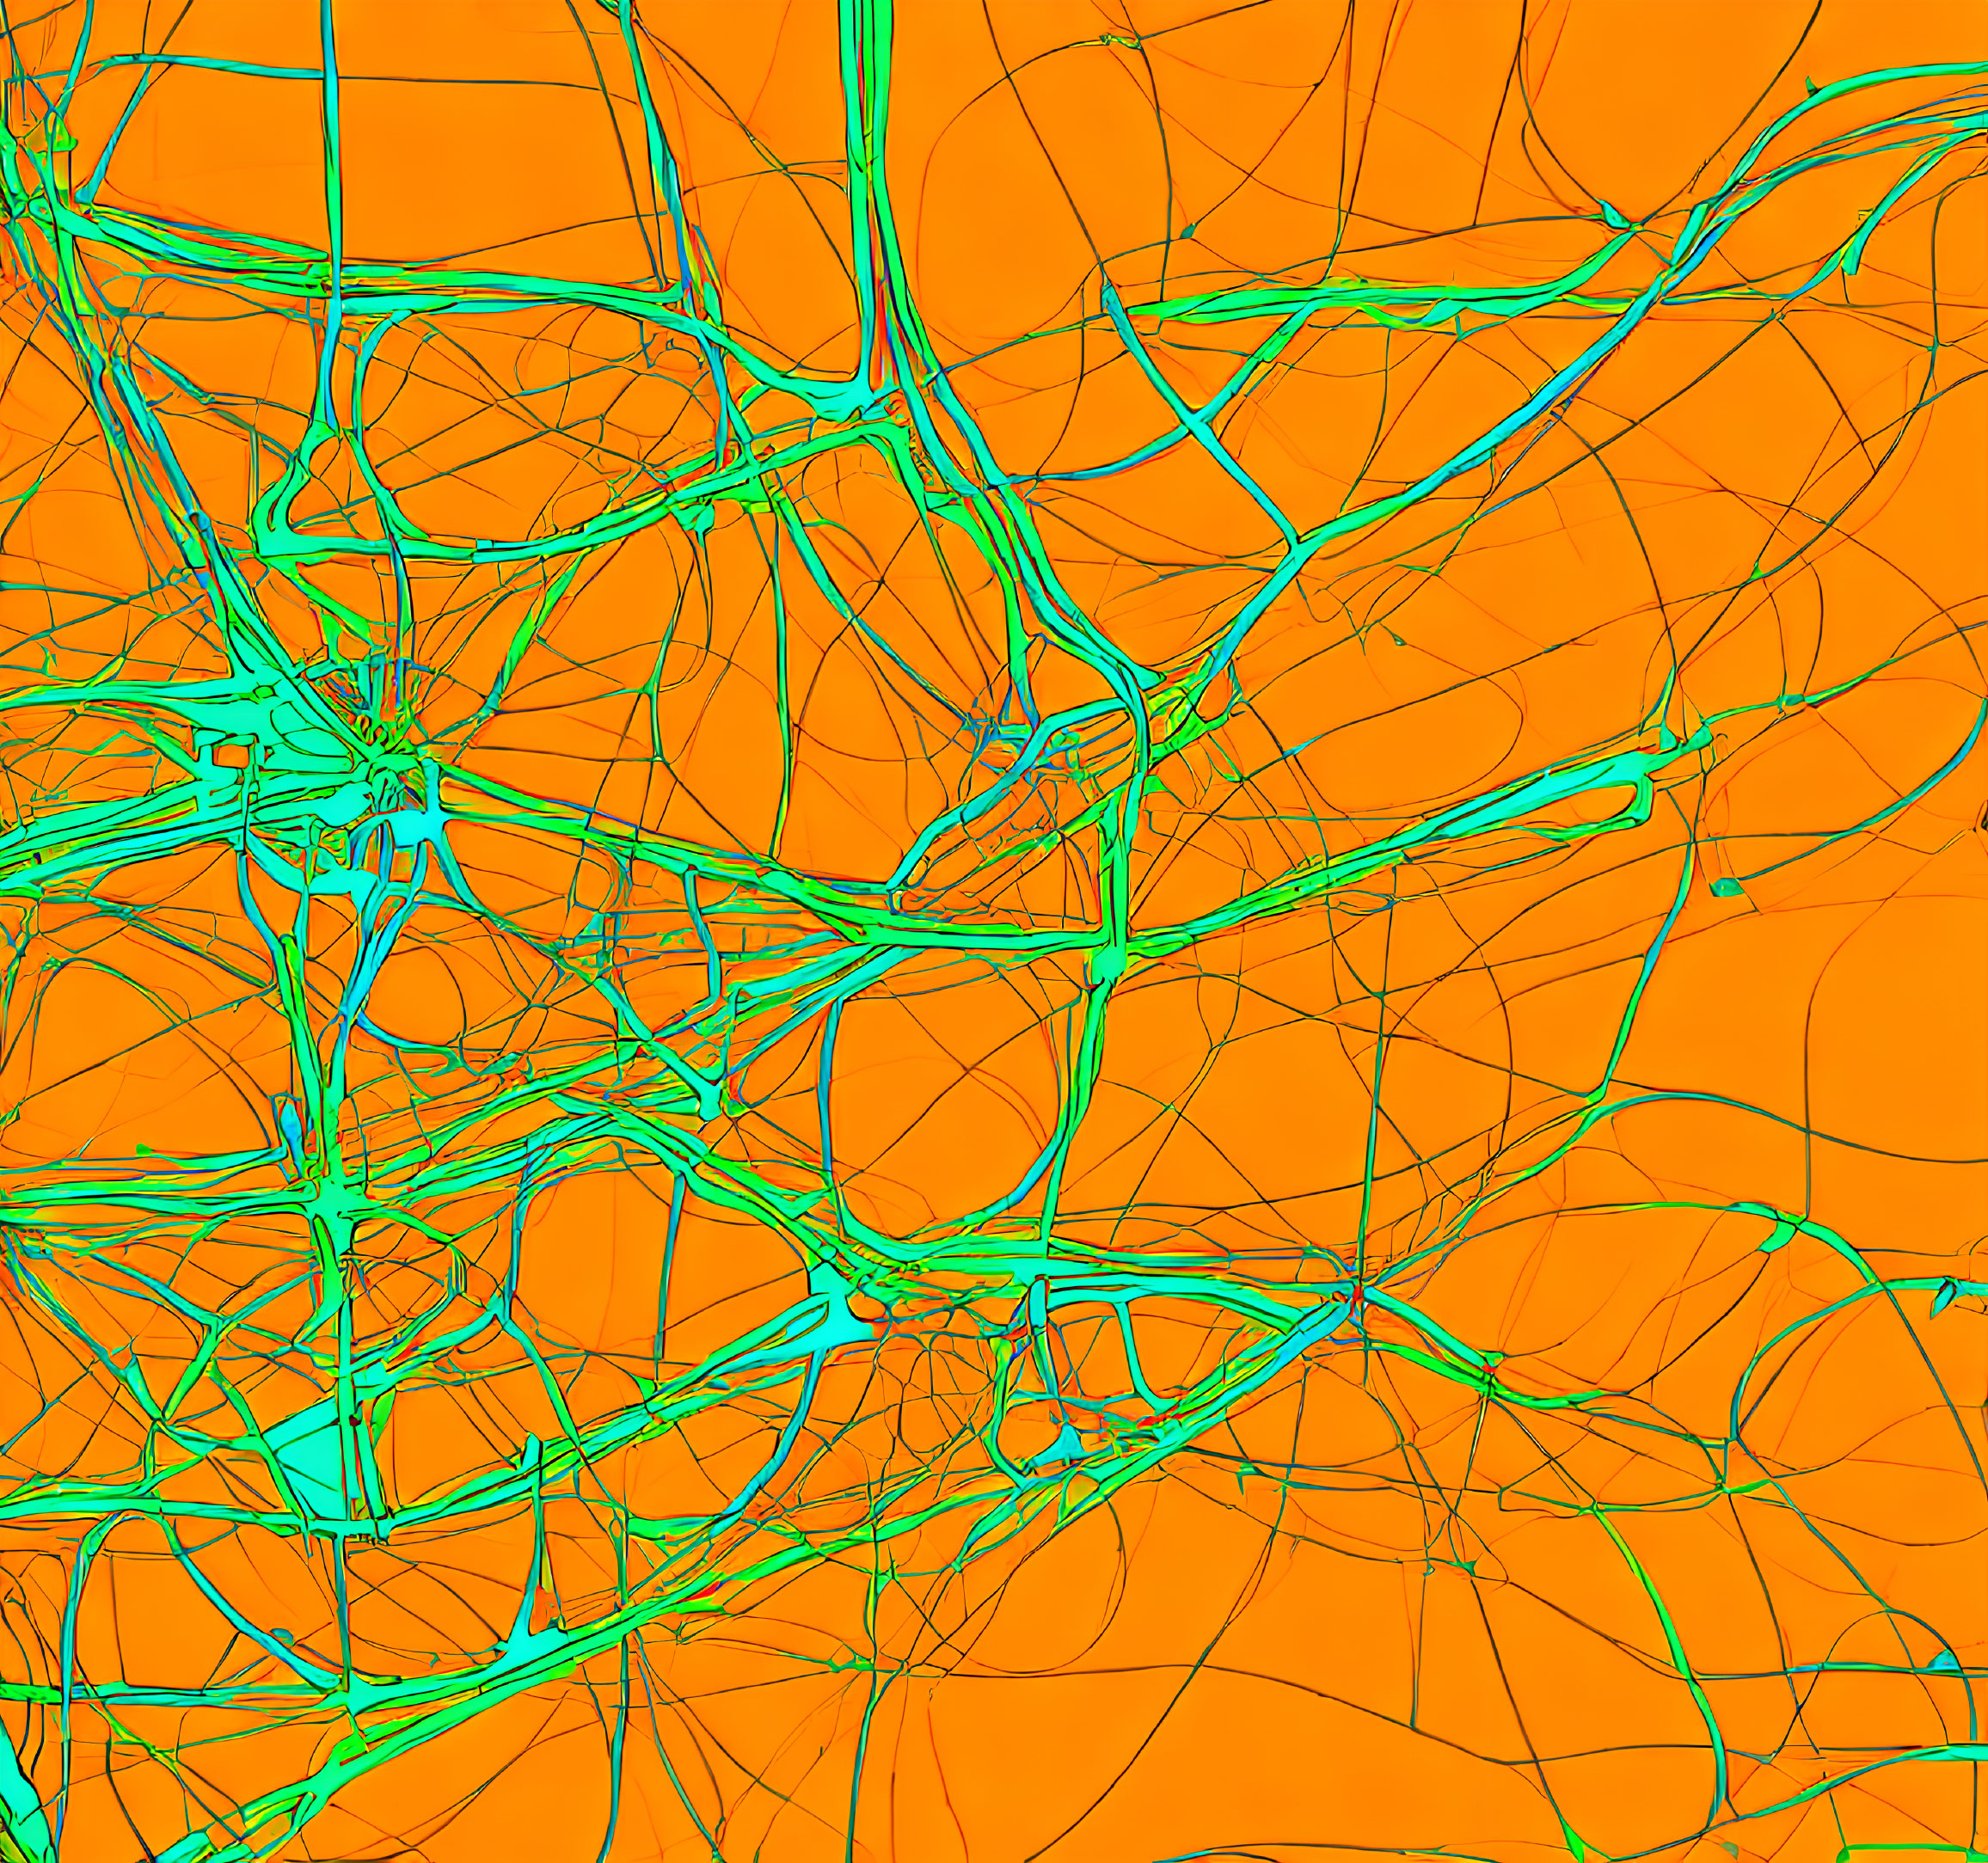 Turquoise Lines on Orange Background: Abstract Chaotic Network